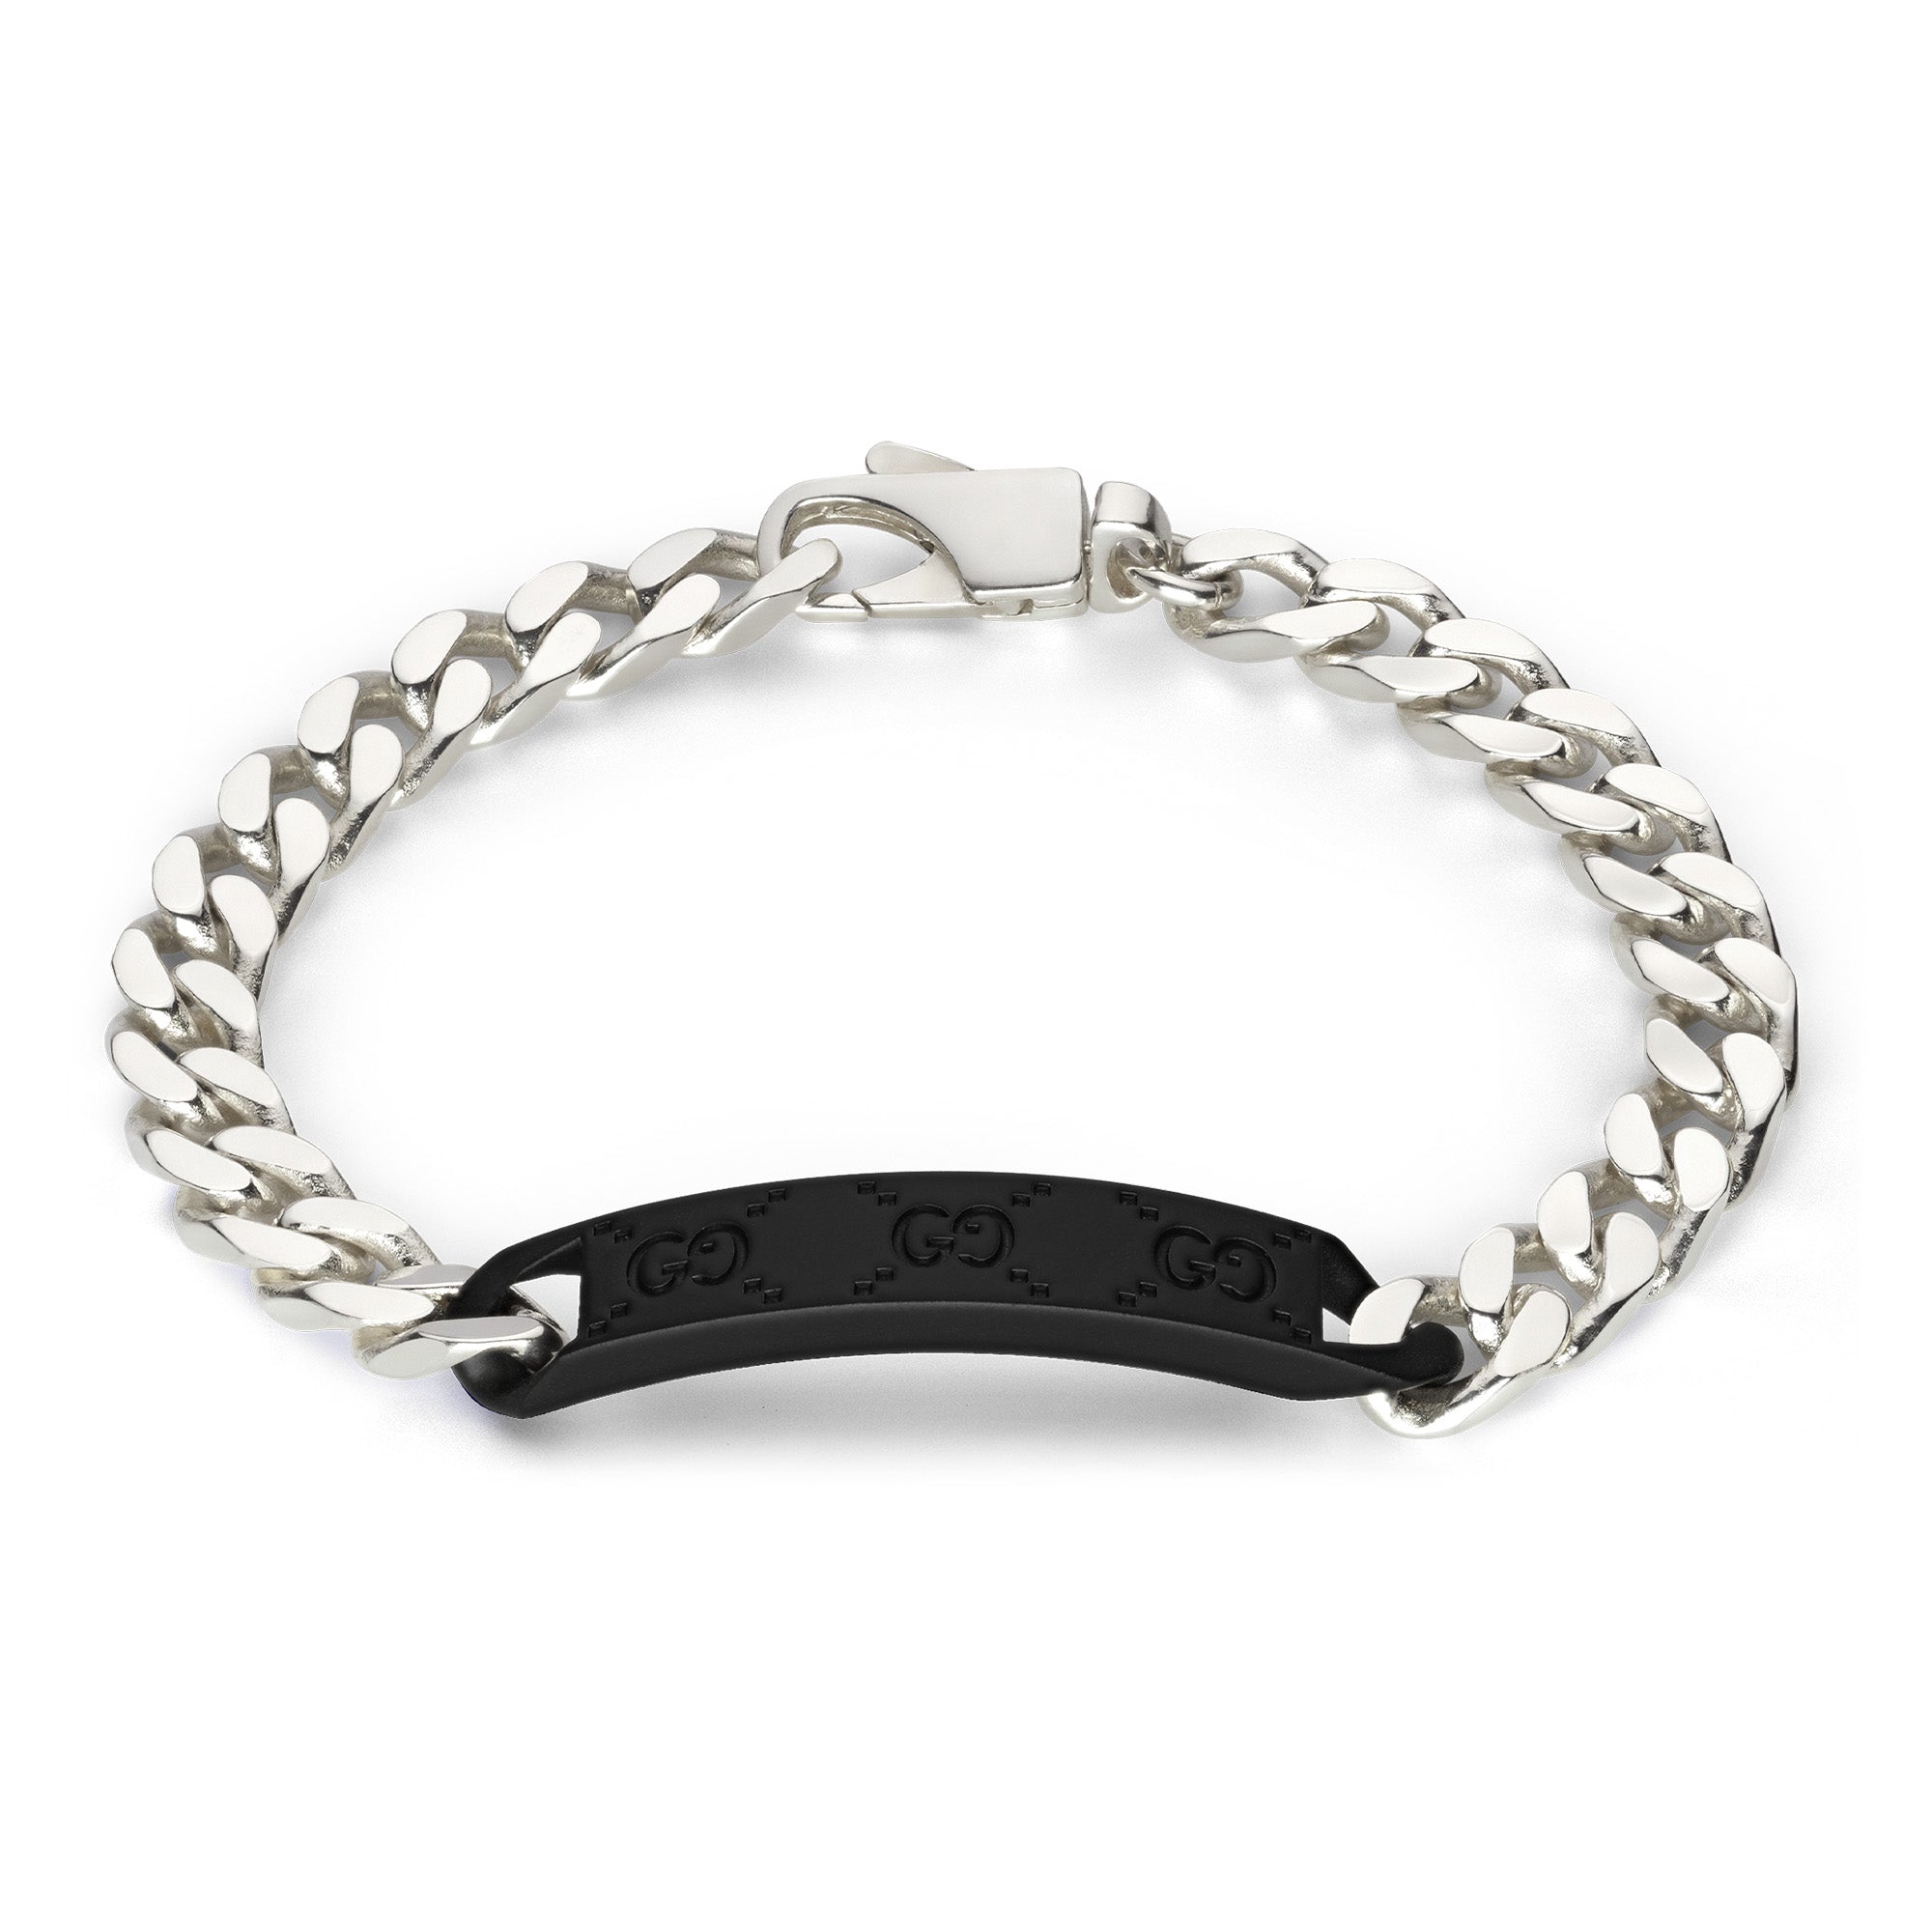 Tag Sterling Silver Black ID Bracelet With Double G Detail